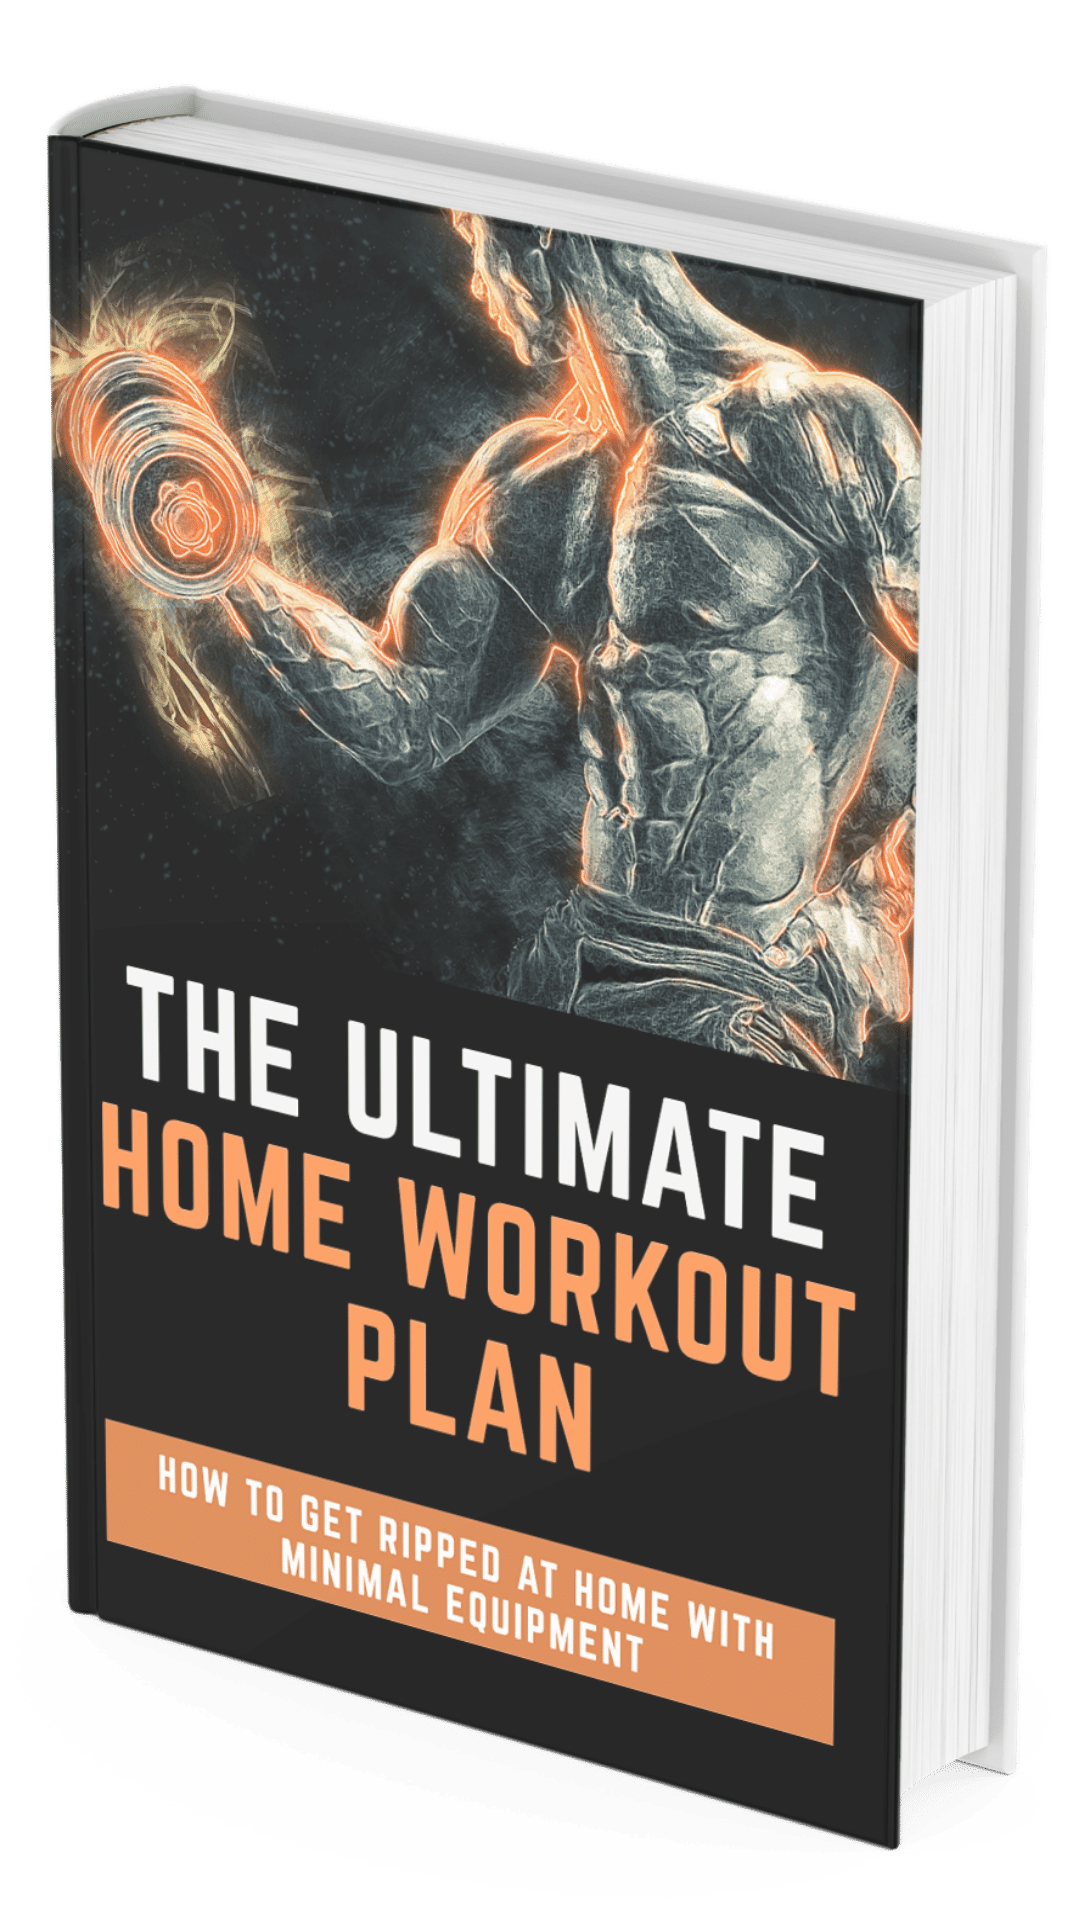 The Ultimate Home Workout Plan eBOOK